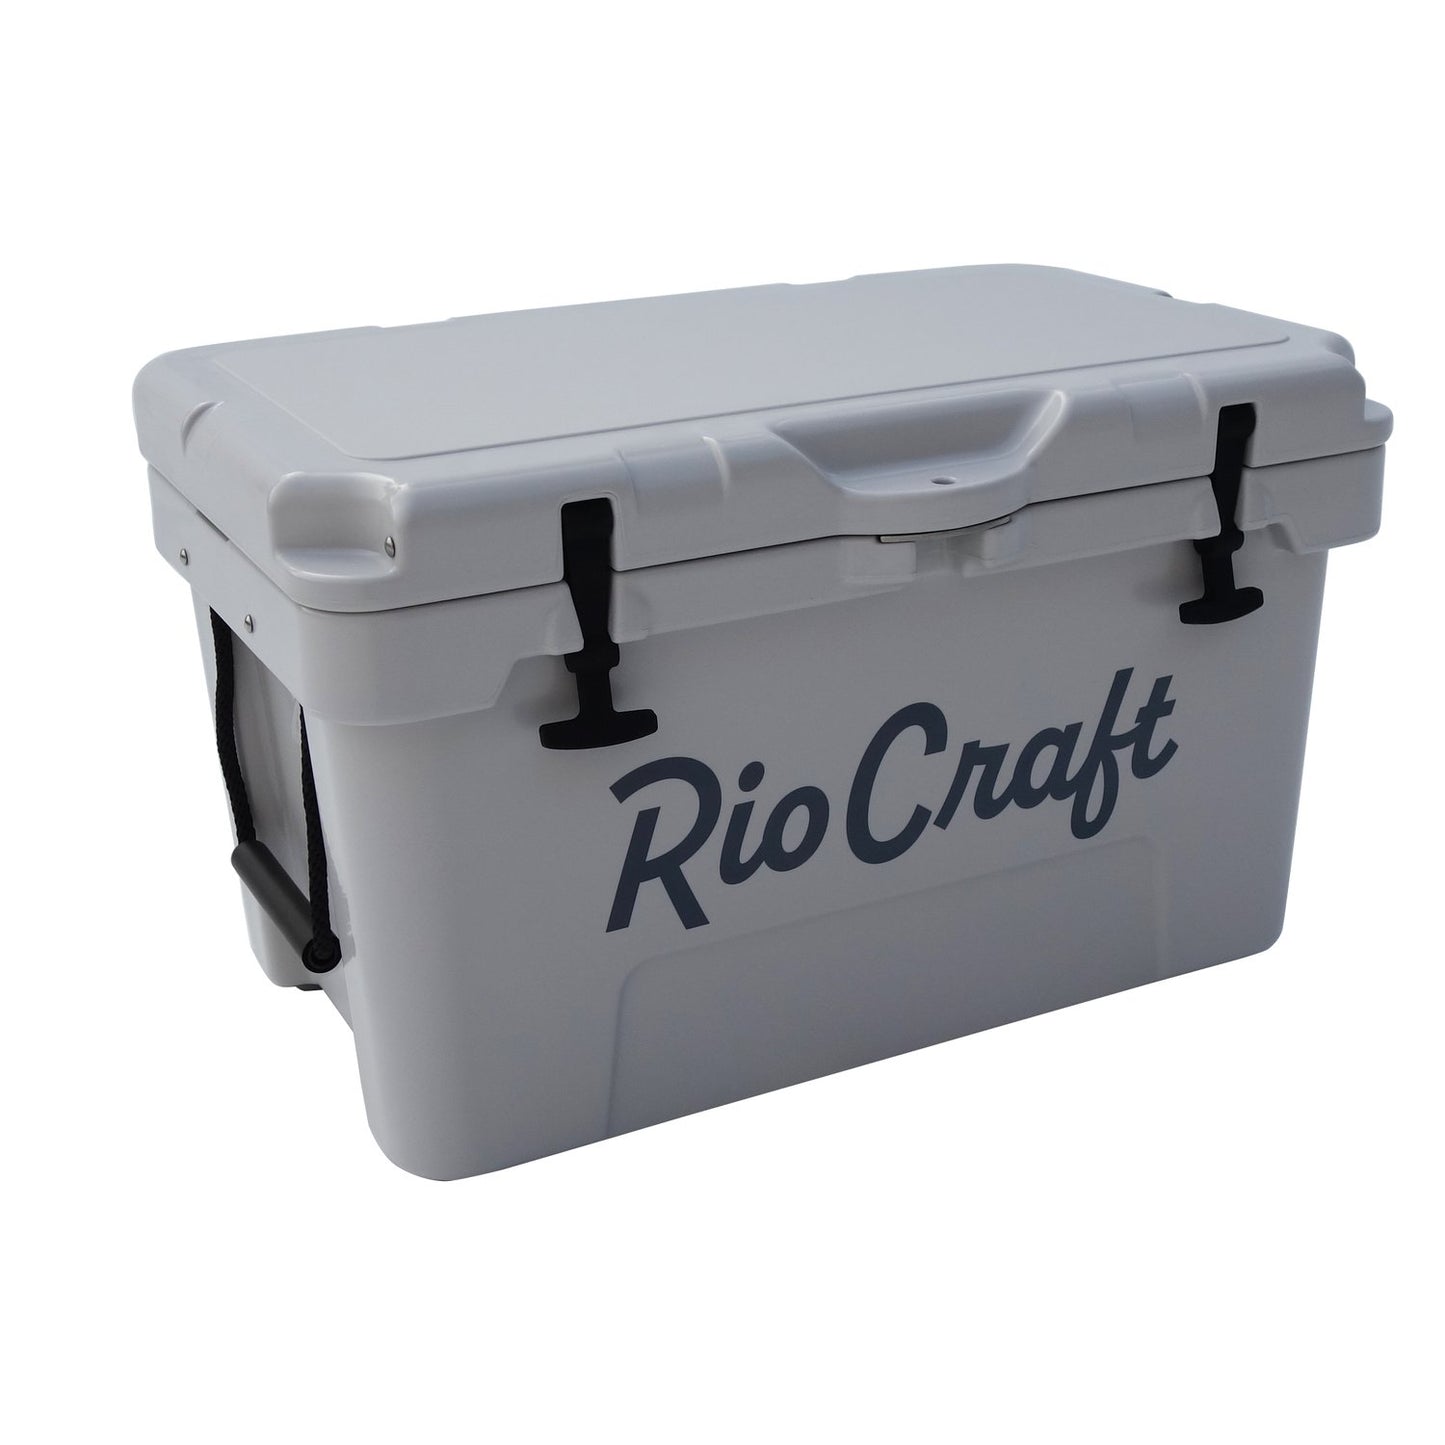 A Rio Craft cooler with the word rio craft on it, keeping beverages ice cold perfect for river missions.